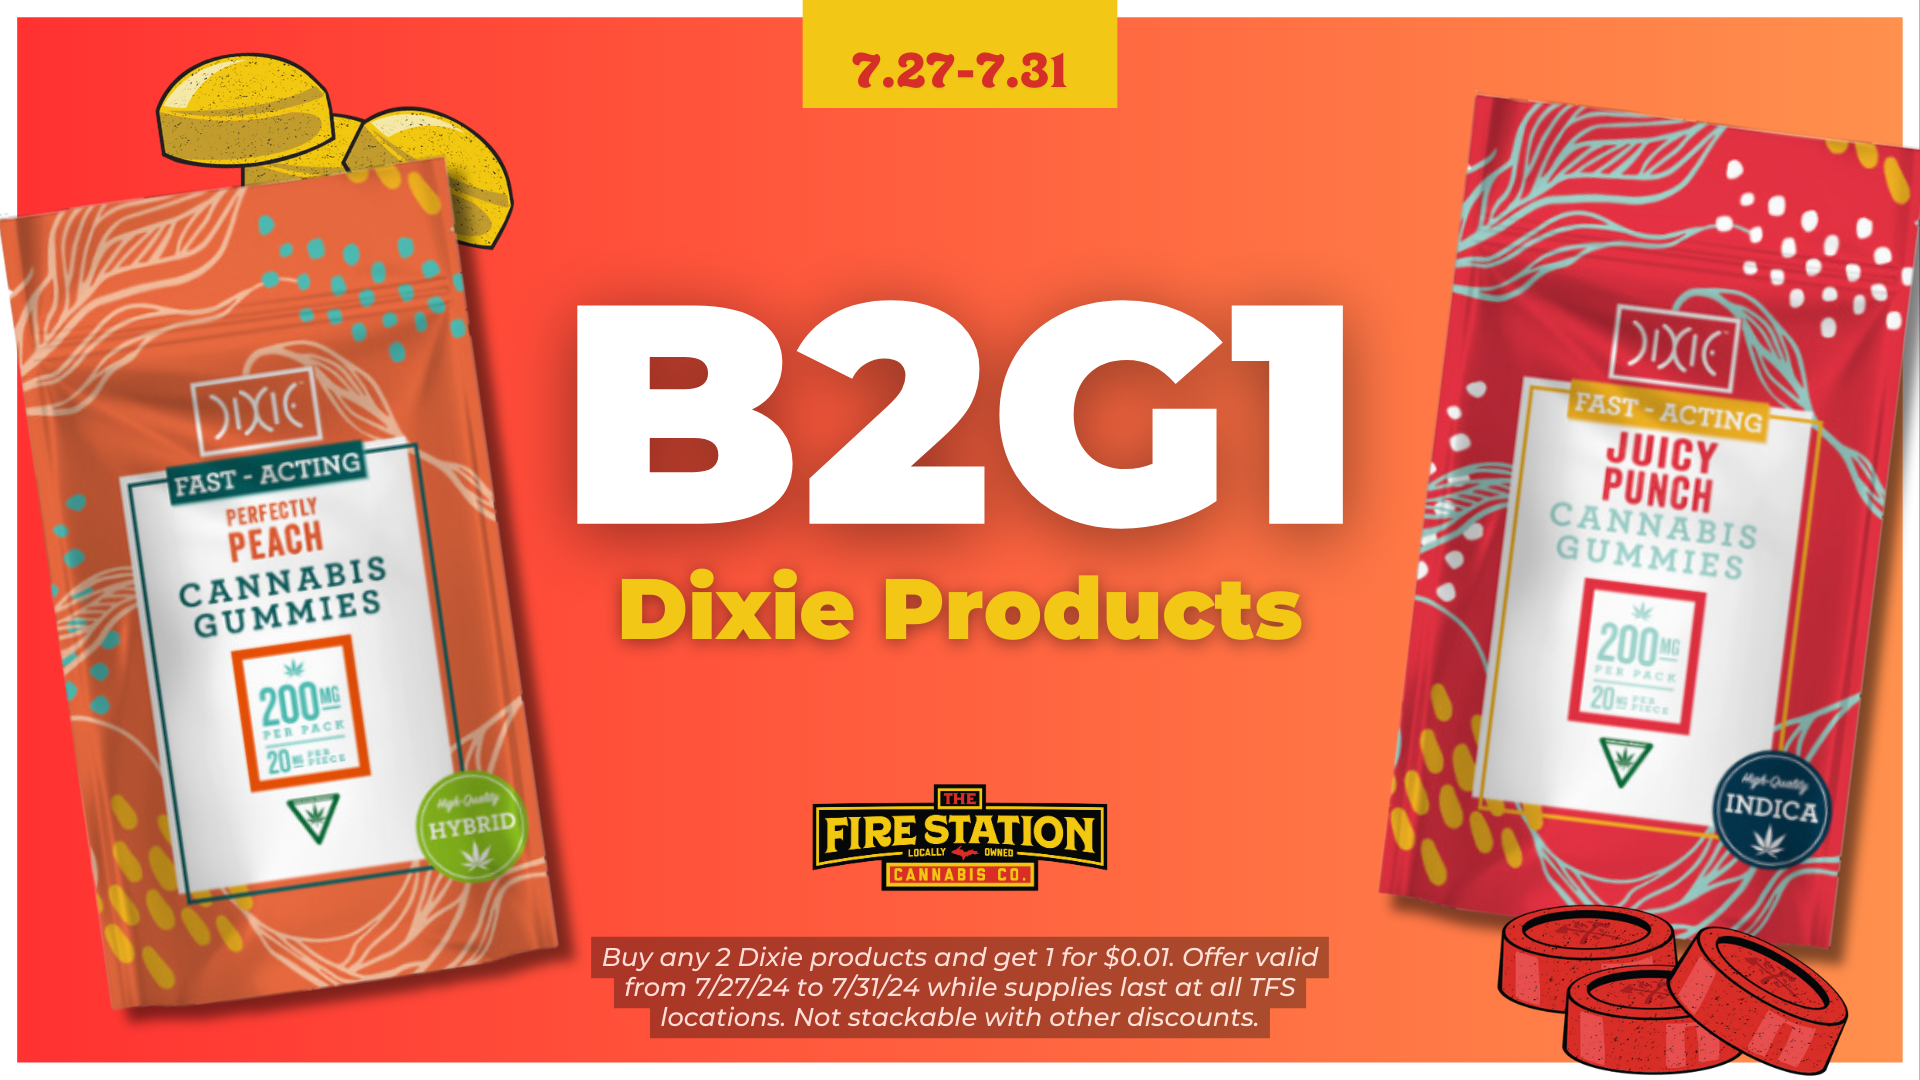 Buy any 2 Dixie products and get 1 for $0.01. Offer valid from 7/27/24 to 7/31/24 while supplies last at all TFS locations. Not stackable with other discounts.